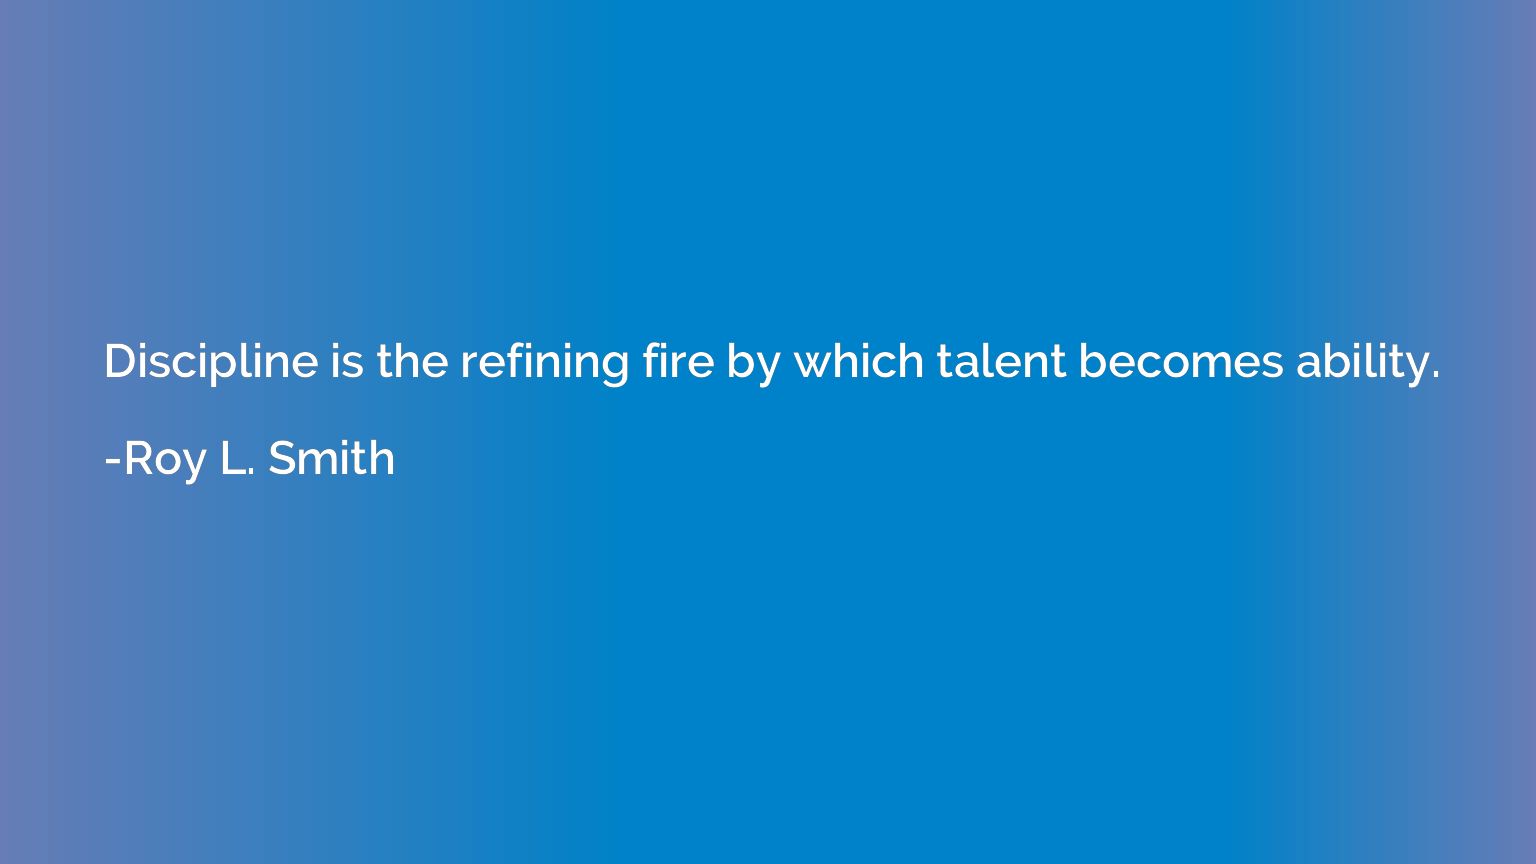 Discipline is the refining fire by which talent becomes abil